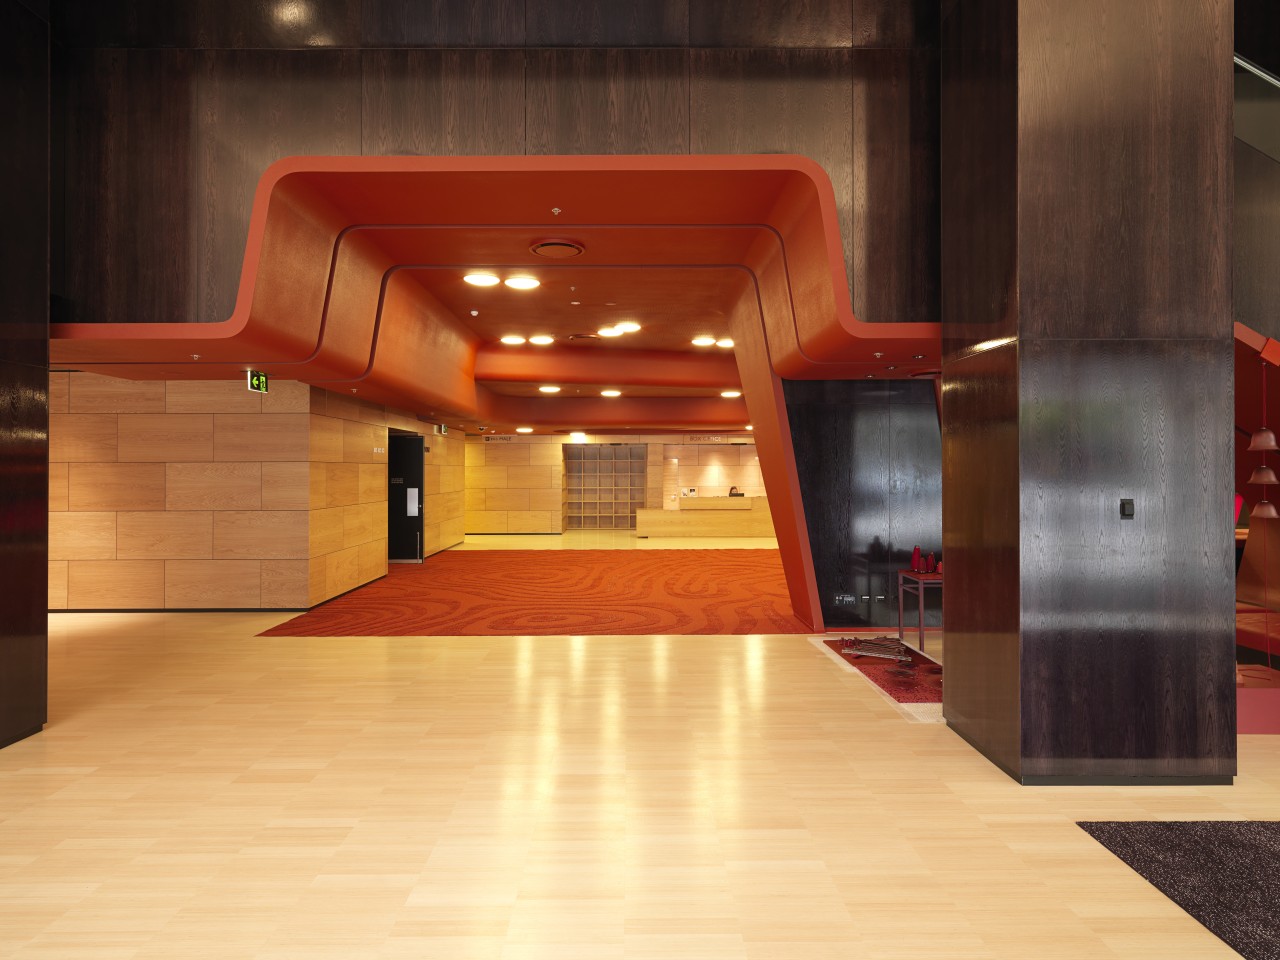 interior view of the MRC which features wood architecture, floor, flooring, interior design, lobby, wood, red, orange